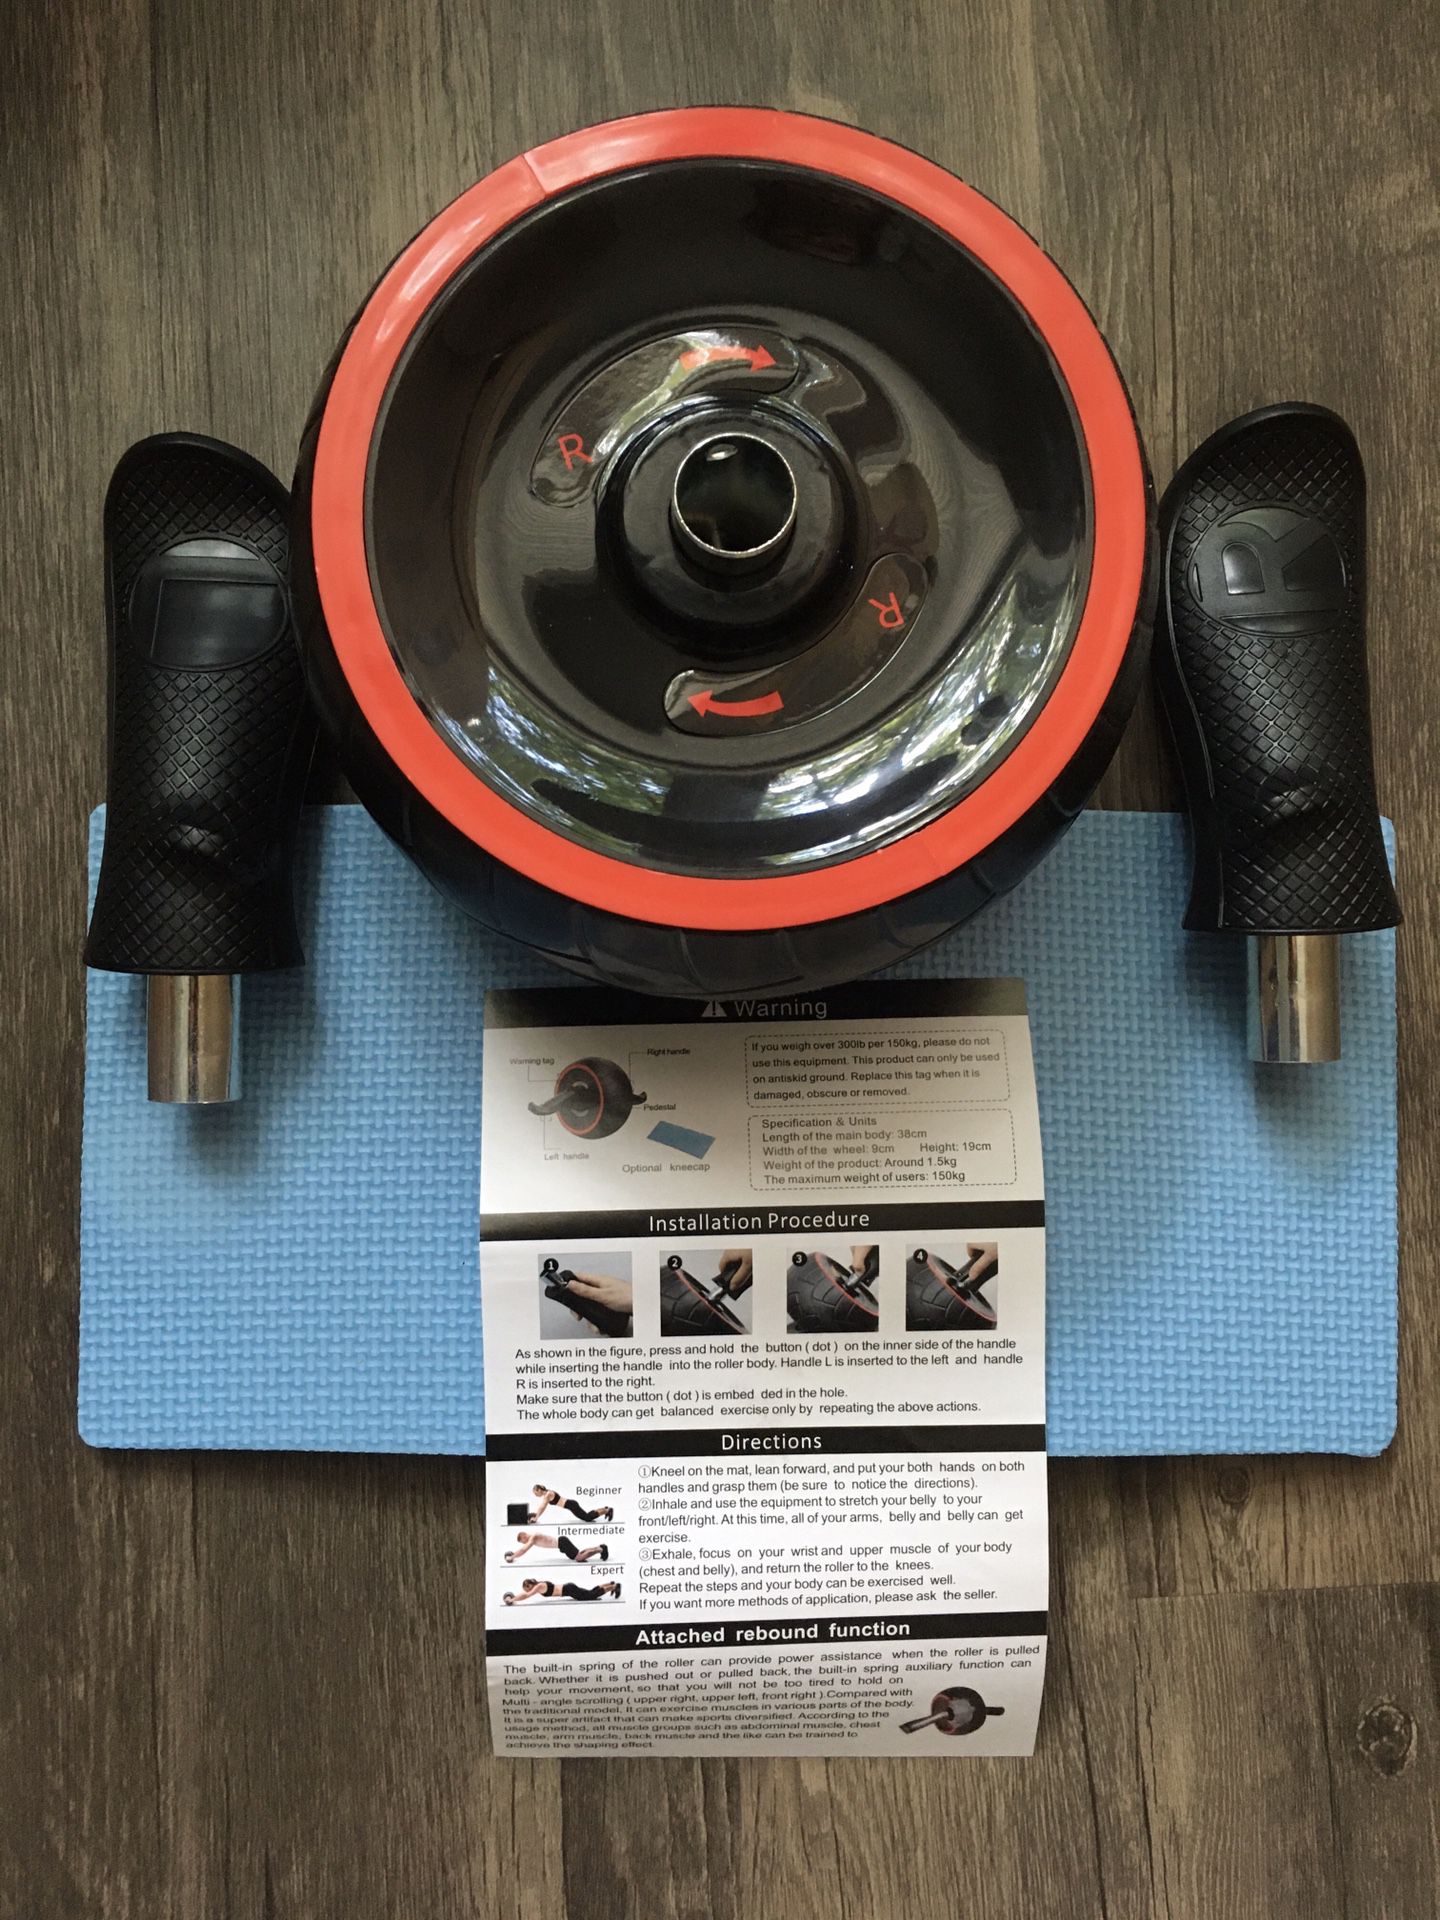 Fitness Ab Roller Wheel for Core Workout with Slight Rebound Function and Knee Pad